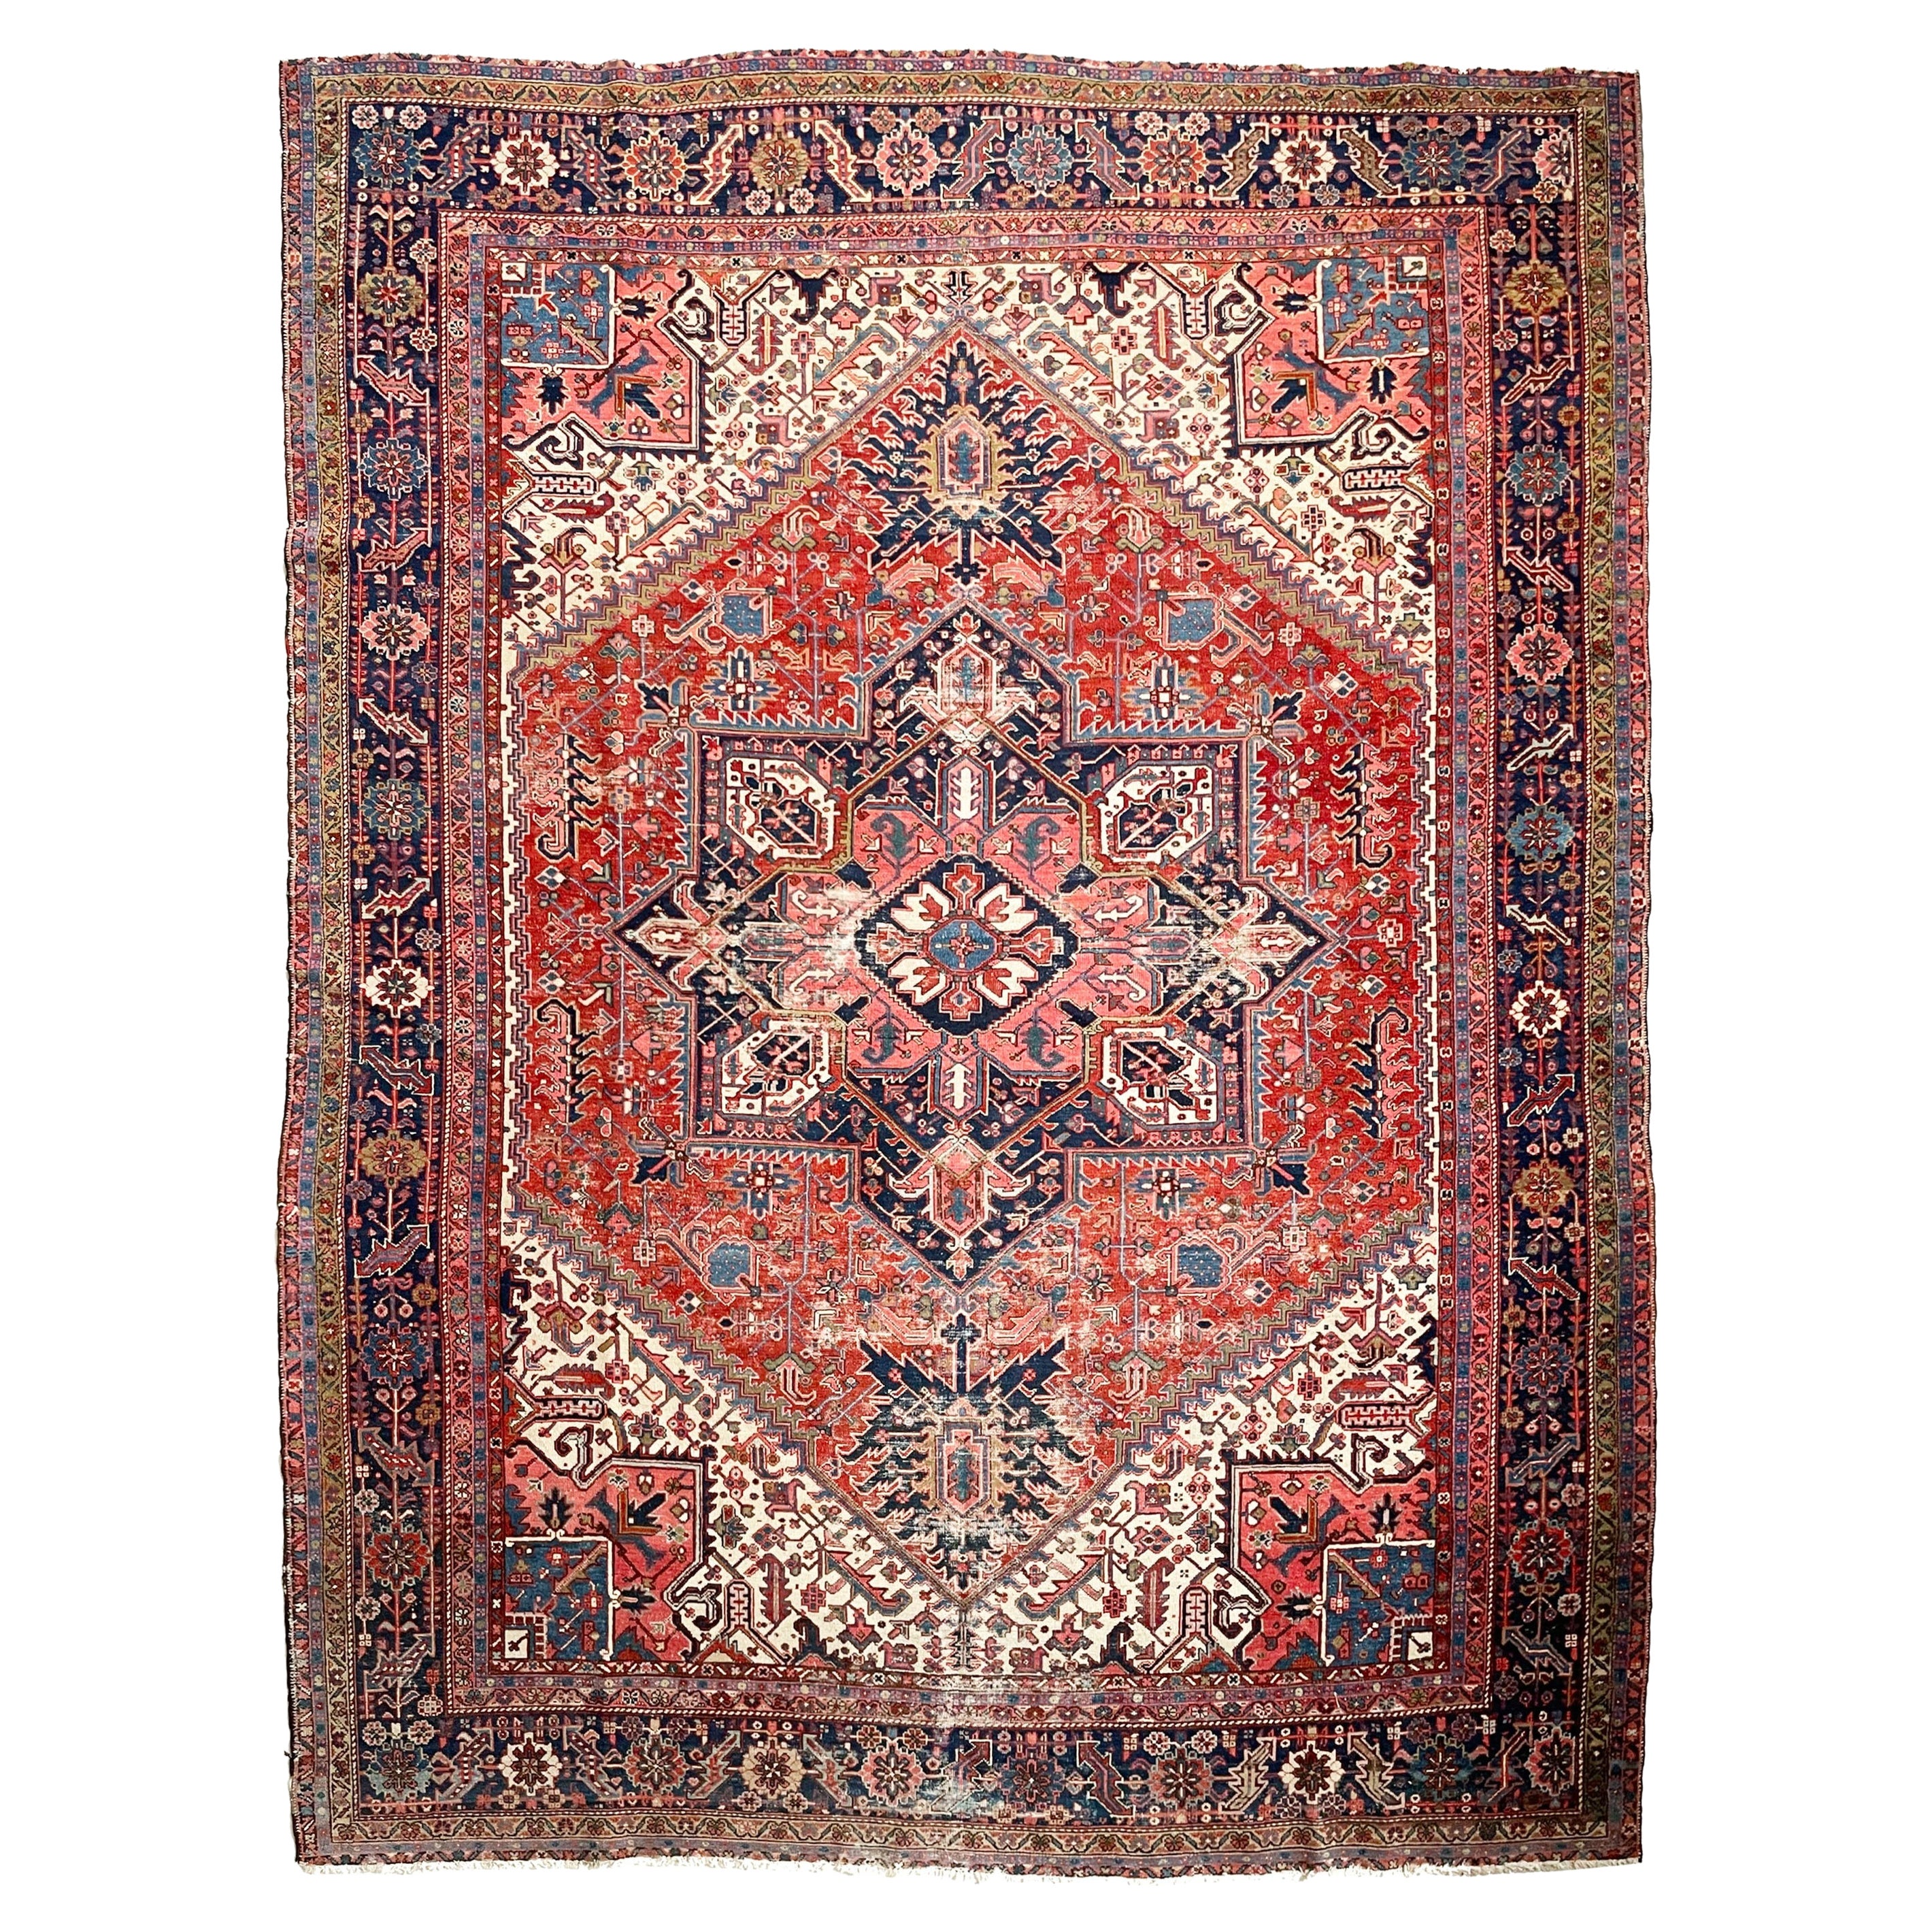 Antique True King Mighty Iconic Karaja Rug, circa 1920's For Sale